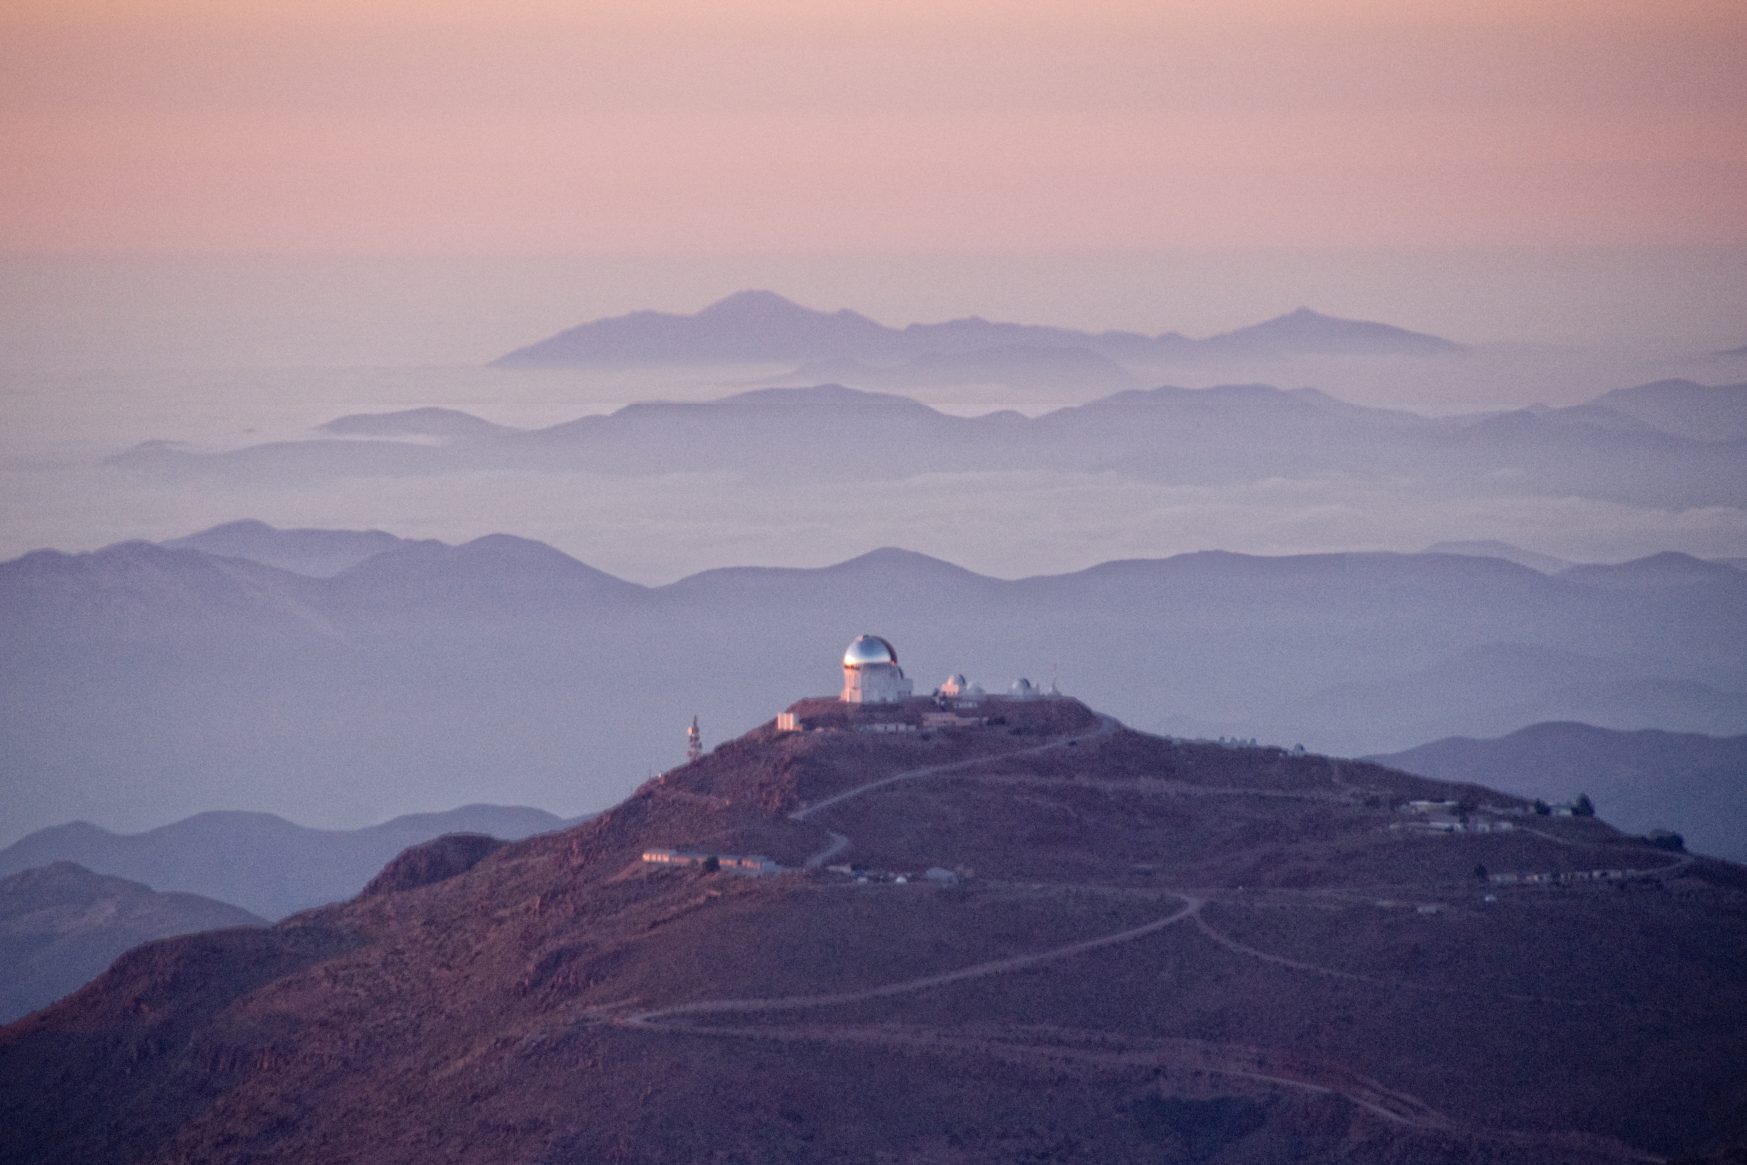 The Cerro Tololo Inter-American Observatory. Photograph by Dennis Crabtree, 2008. CC BY-NC-ND 2.0.